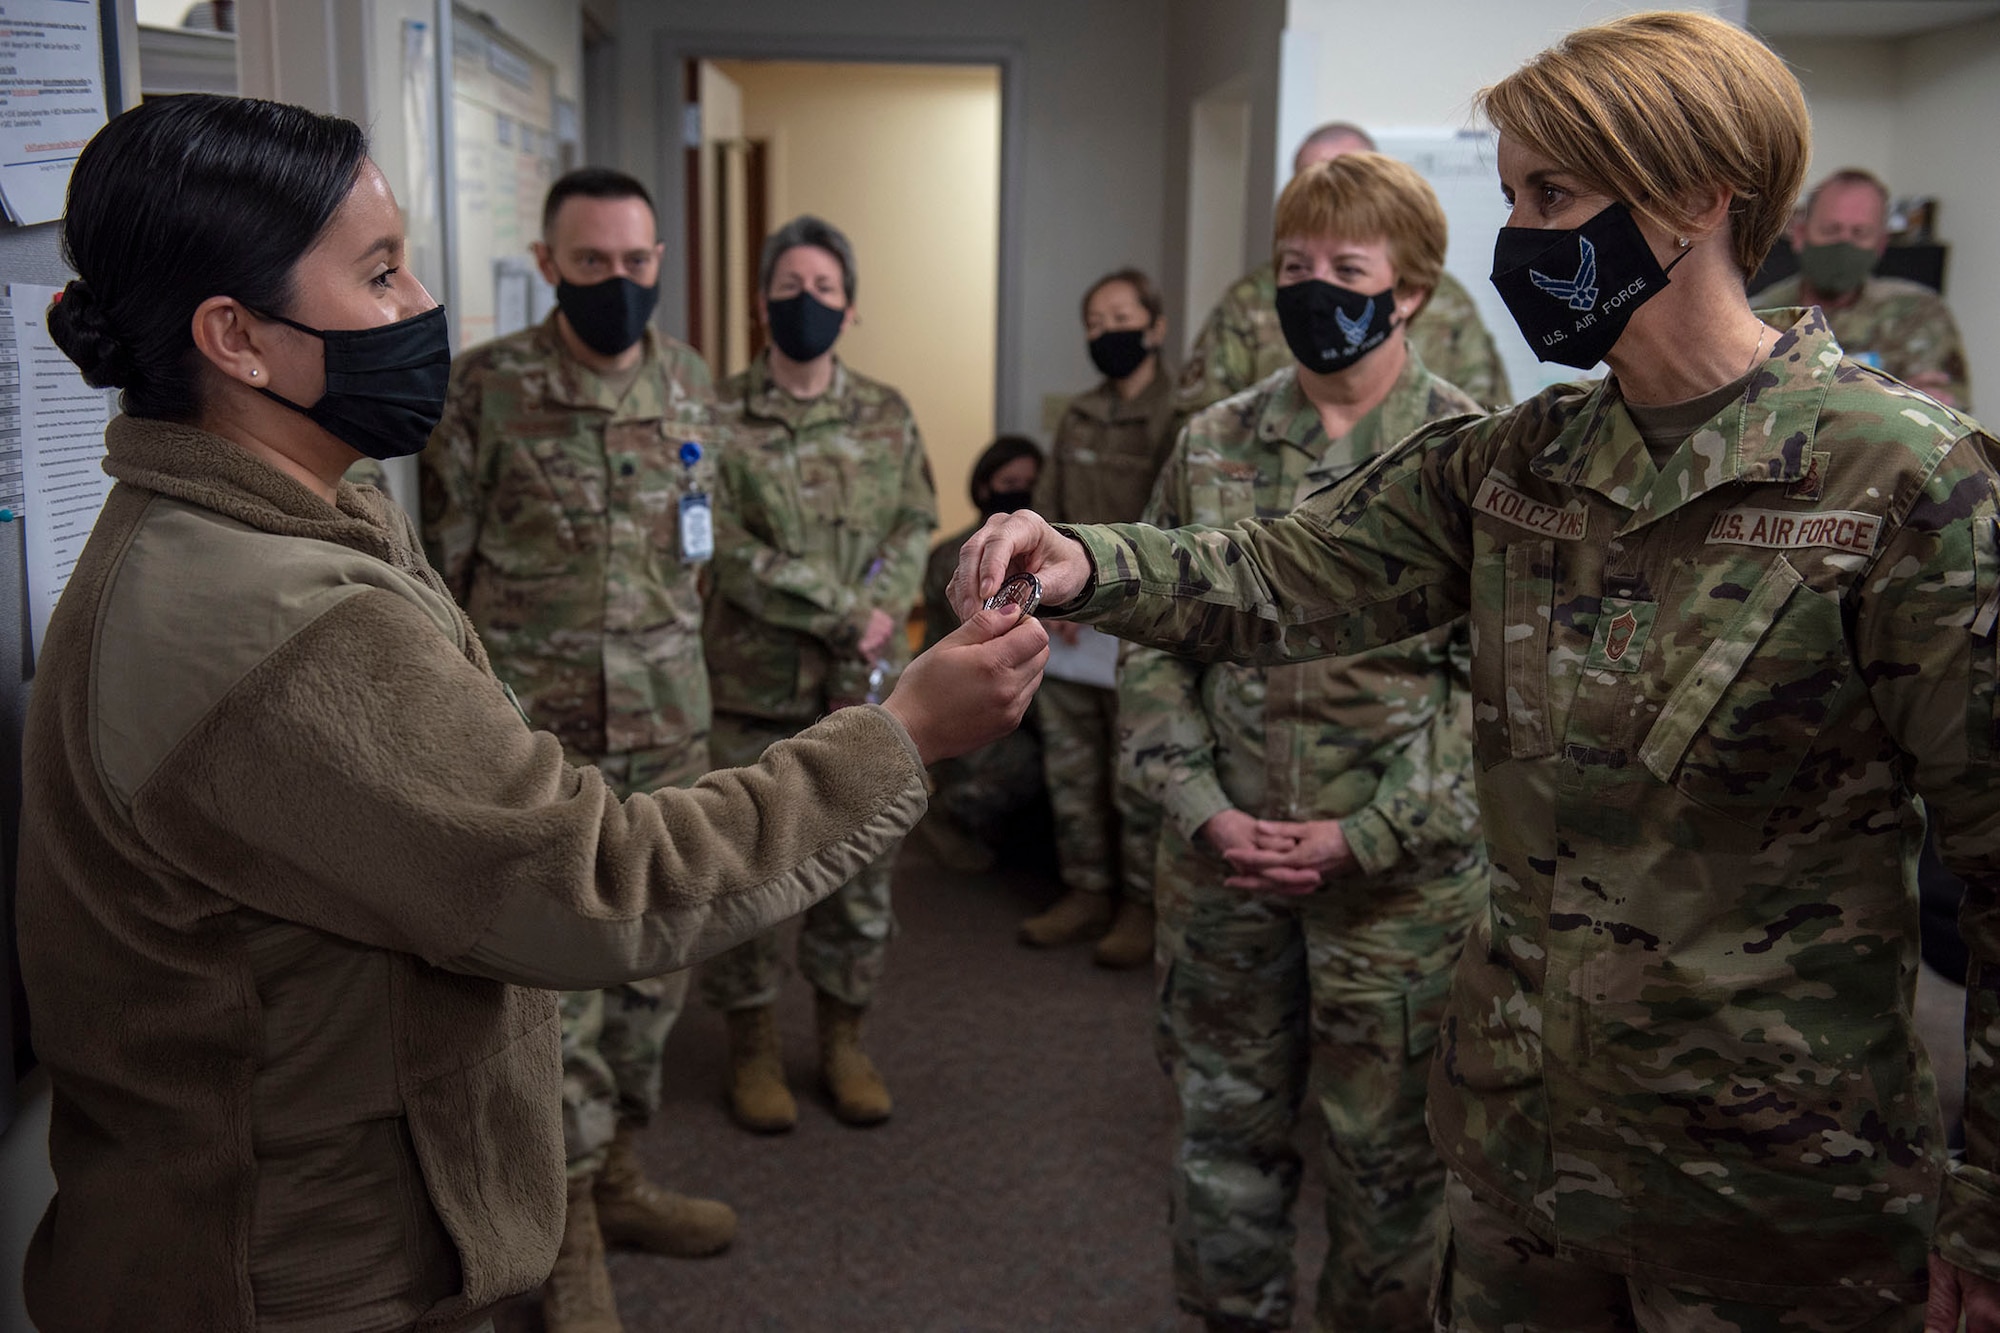 Chief Master Sgt. Dawn Kolczynski, medical enlisted force and enlisted corps chief, coins Tech. Sgt. Alejandra Allison, 341st Medical Group public health supervisor, for her work during the COVID-19 pandemic April 29, 2021, on her visit to Malmstrom Air Force Base, Mont.